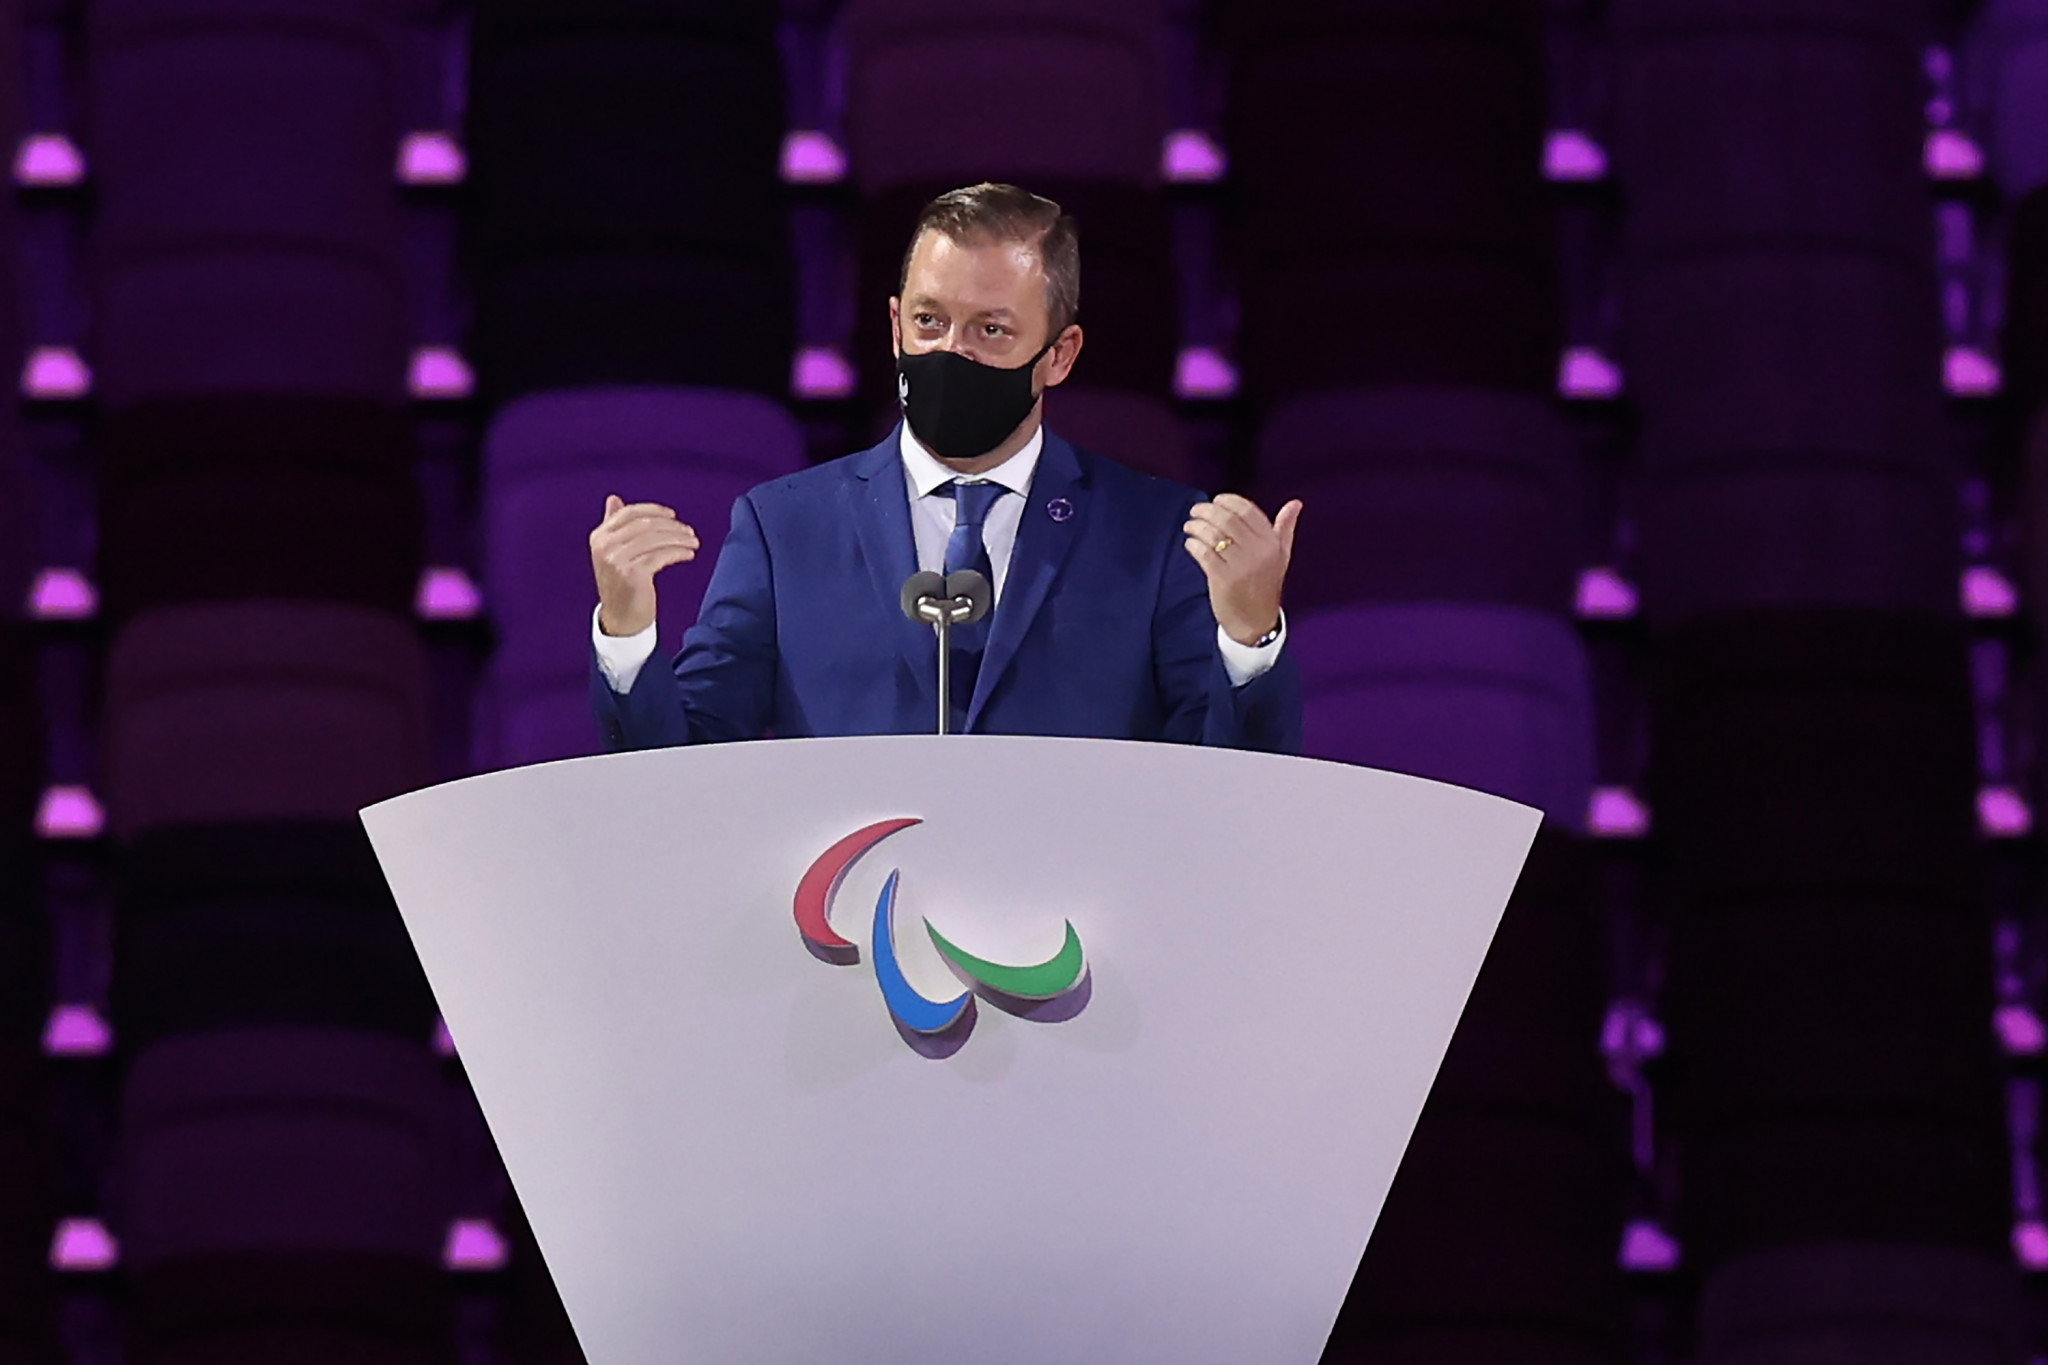 IPC President Andrew Parsons called for a more inclusive society in his speech at the Tokyo 2020 Paralympics Opening Ceremony ©Getty Images